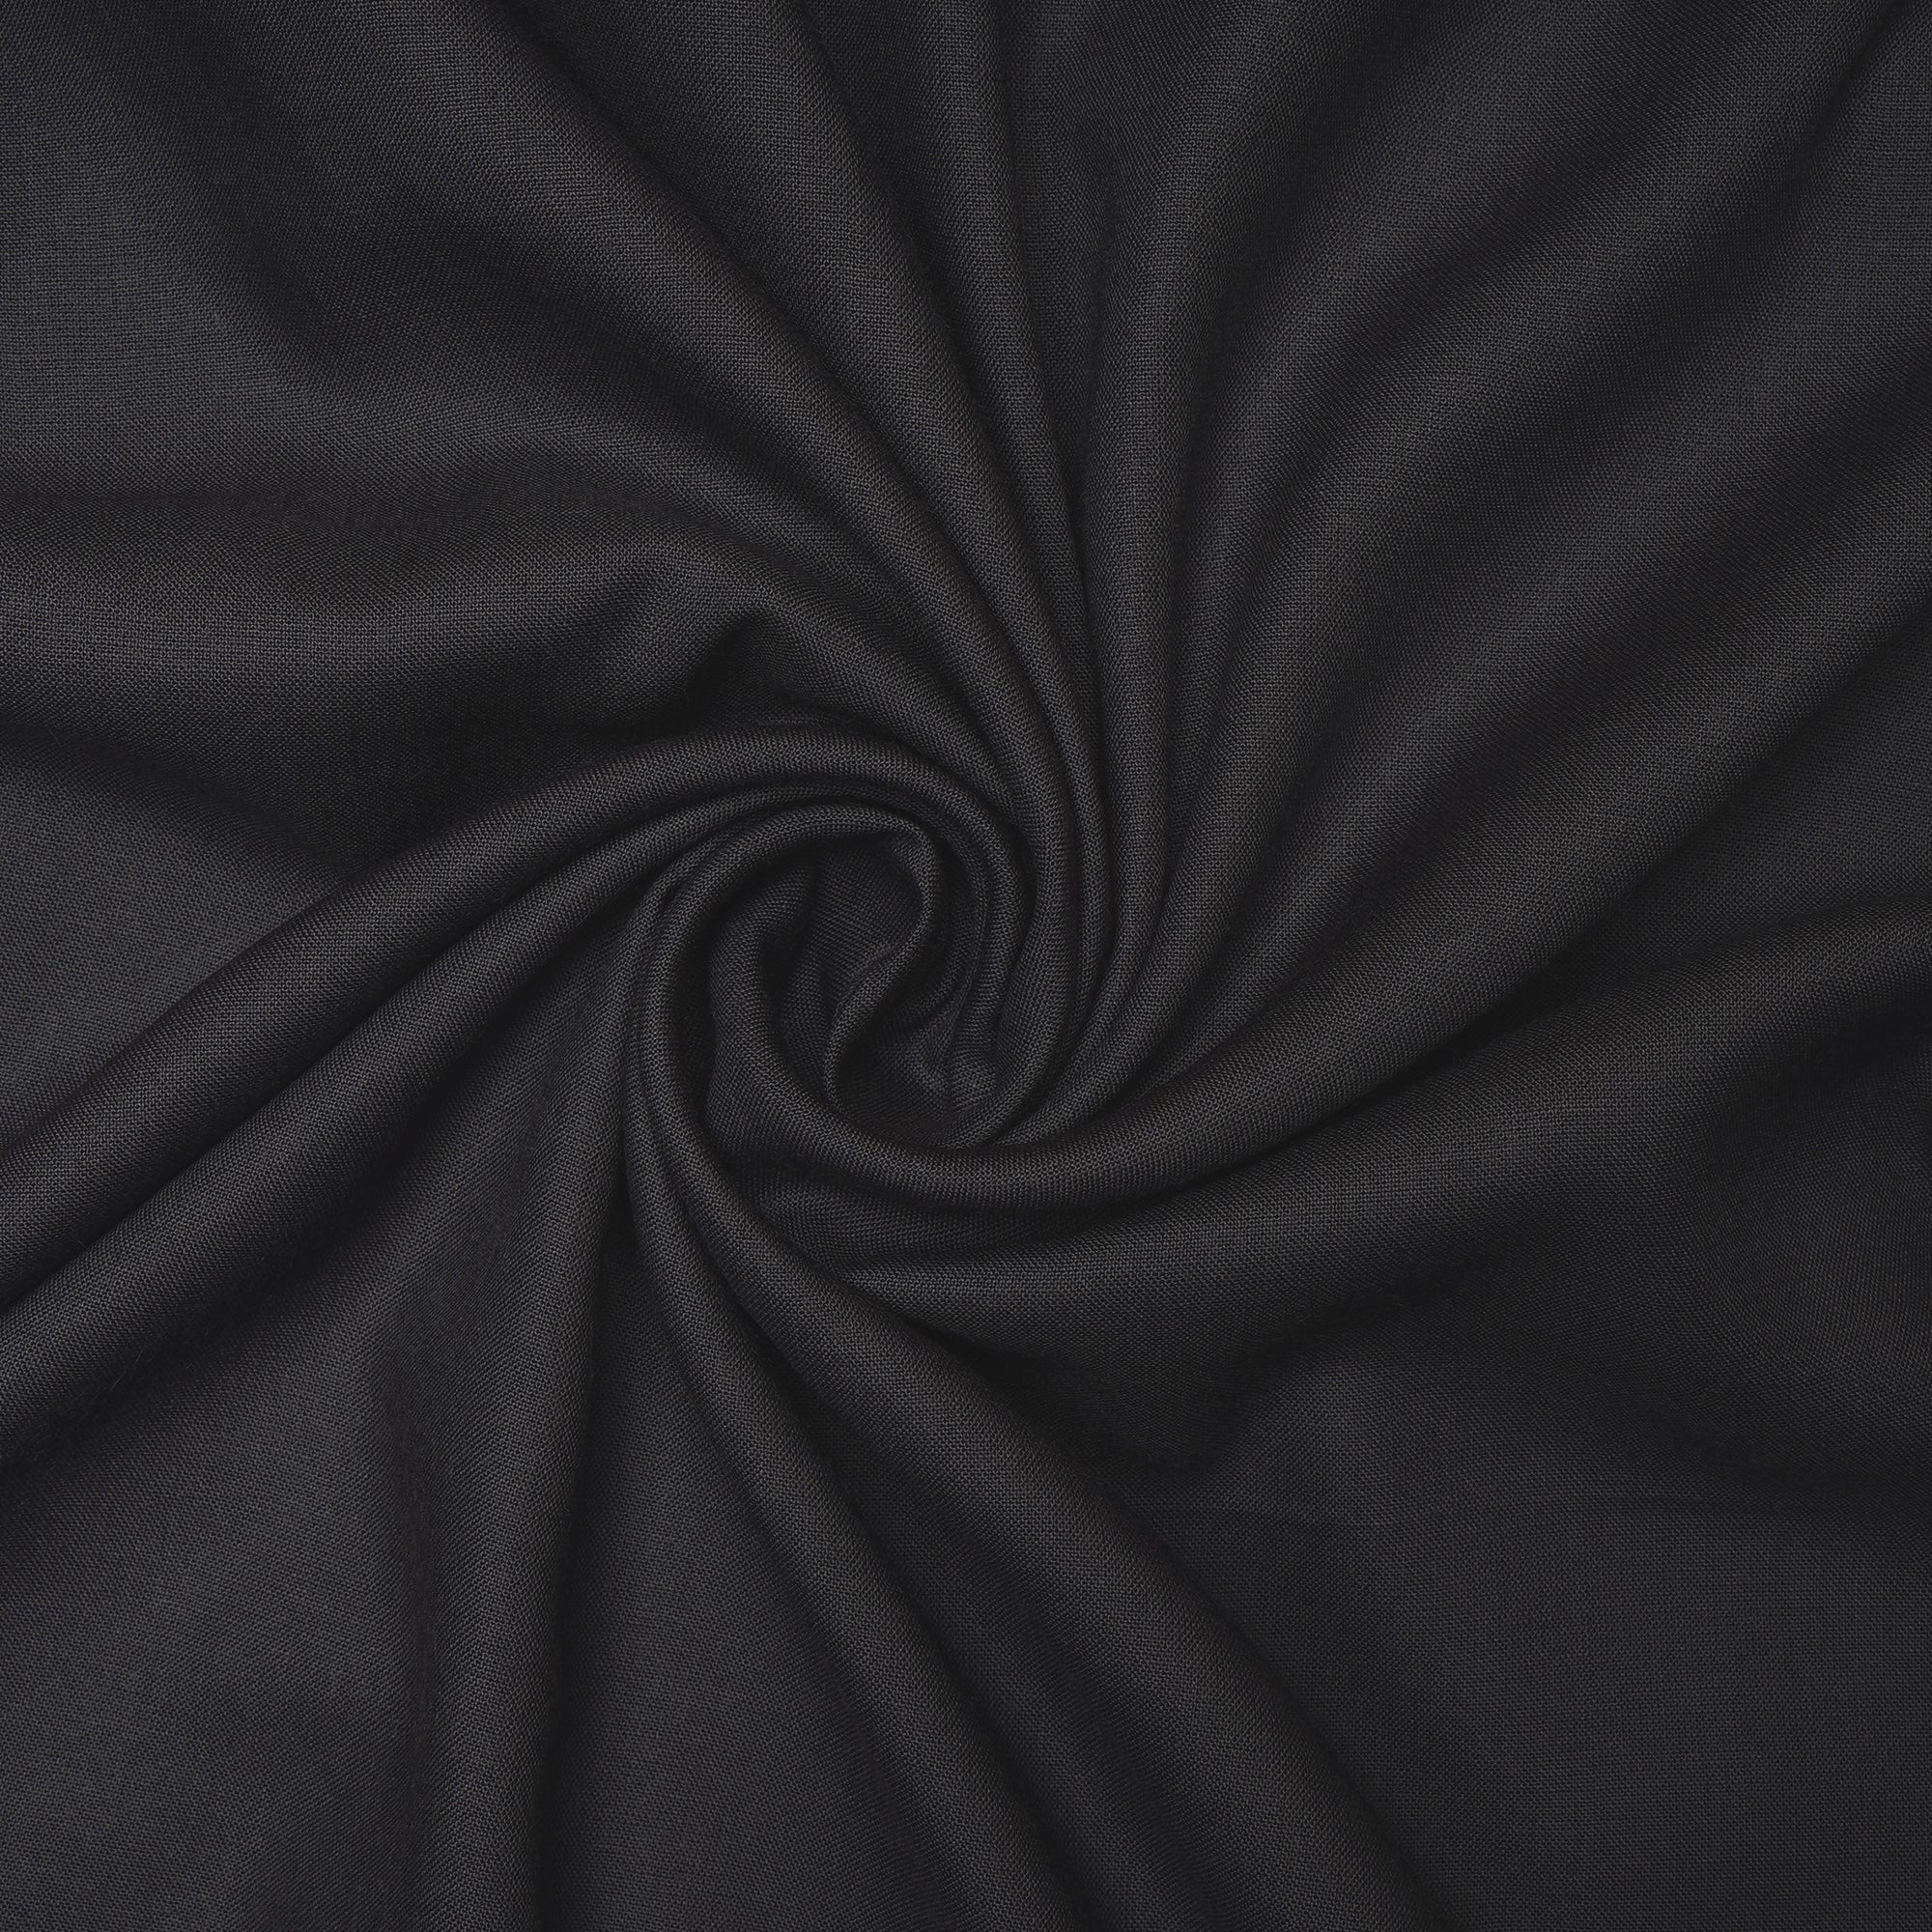 Charcoal Plain Mill Dyed Rayon Fabric